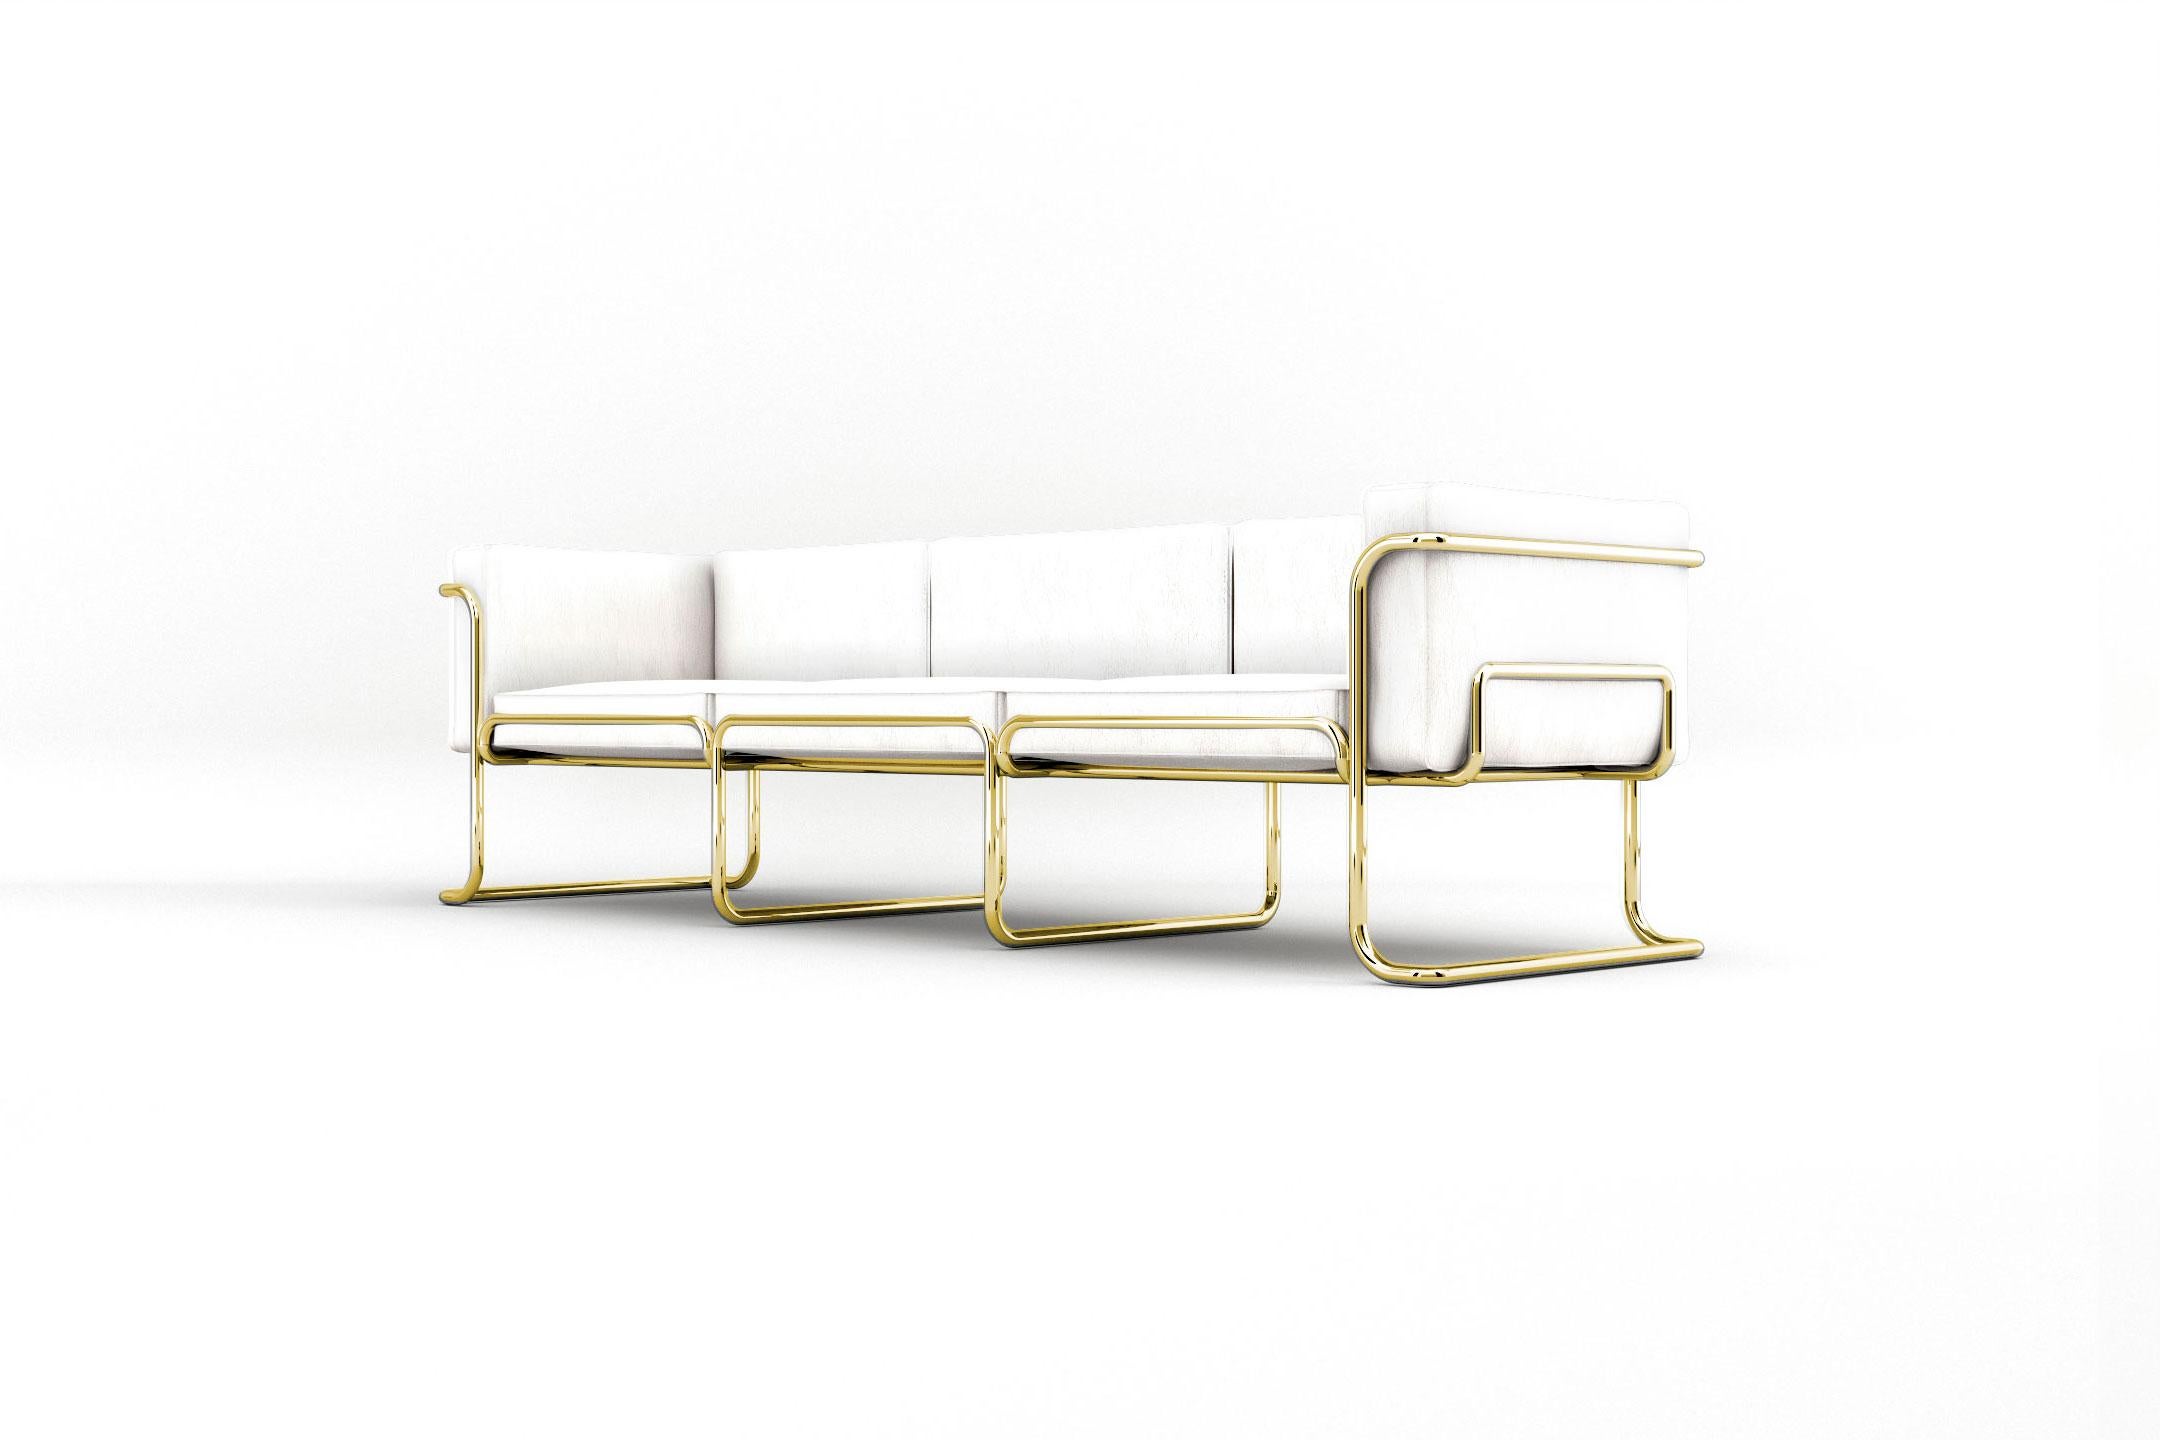 Polished Lotus 3 Seat Sofa - Modern White Leather Sofa with Brass Legs For Sale